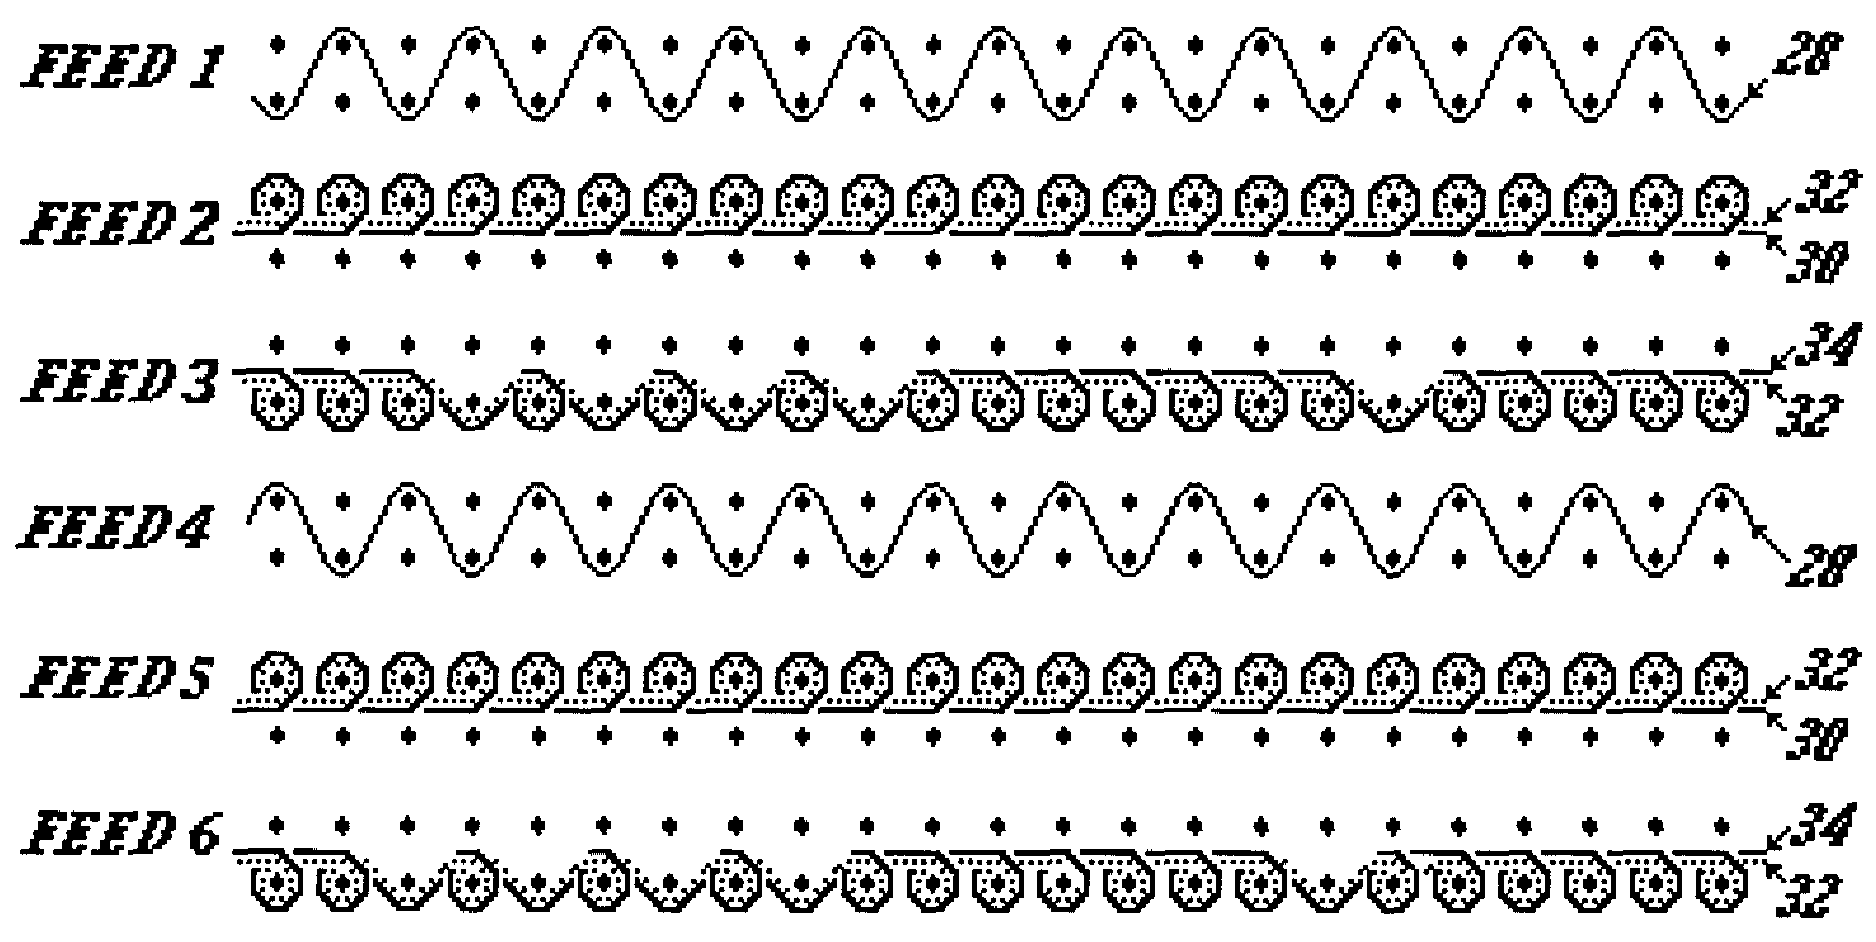 Decorative faced multi-layer weft knit spacer fabric, method, and articles made therefrom